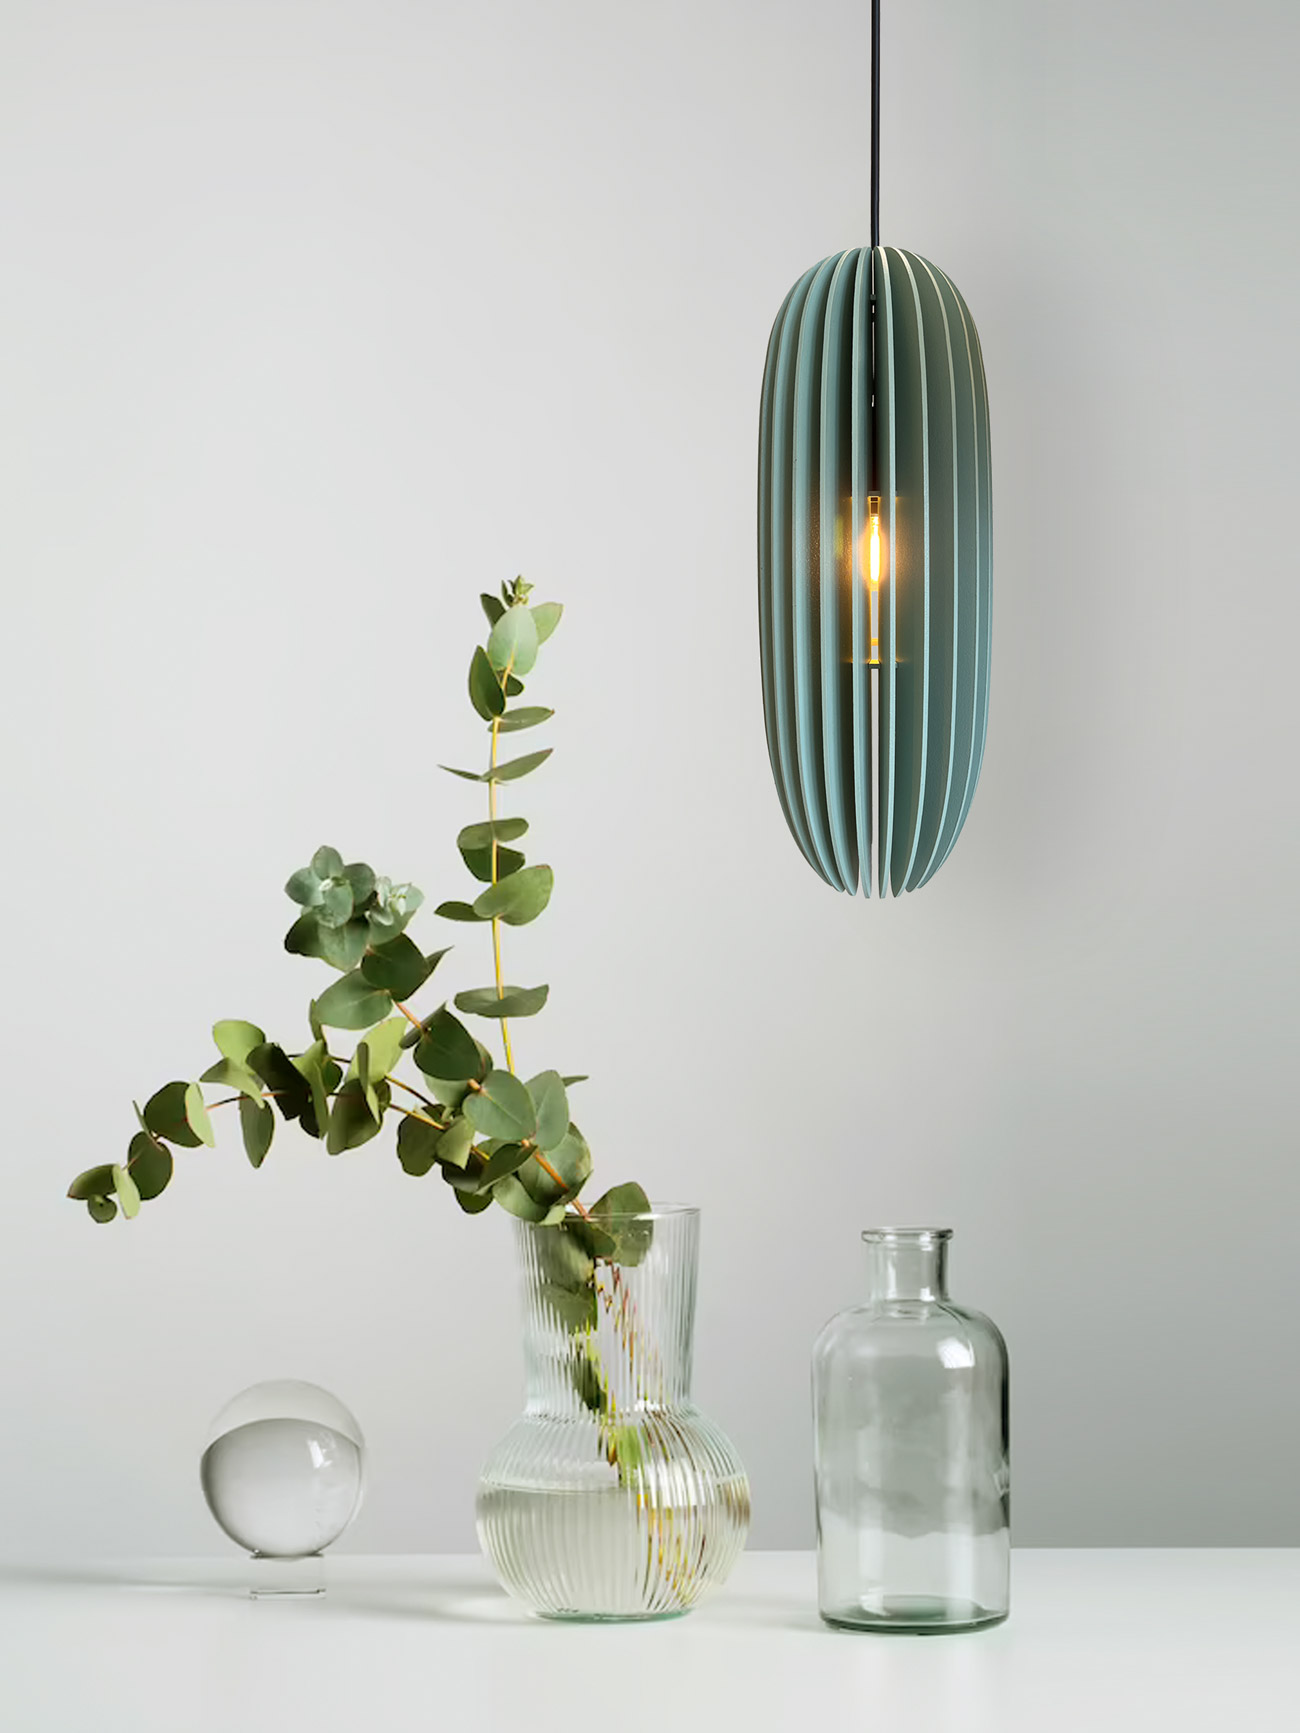 Modern sage-colored pendant lamp with 24 lamellas, perfect for illuminating interior spaces with style.